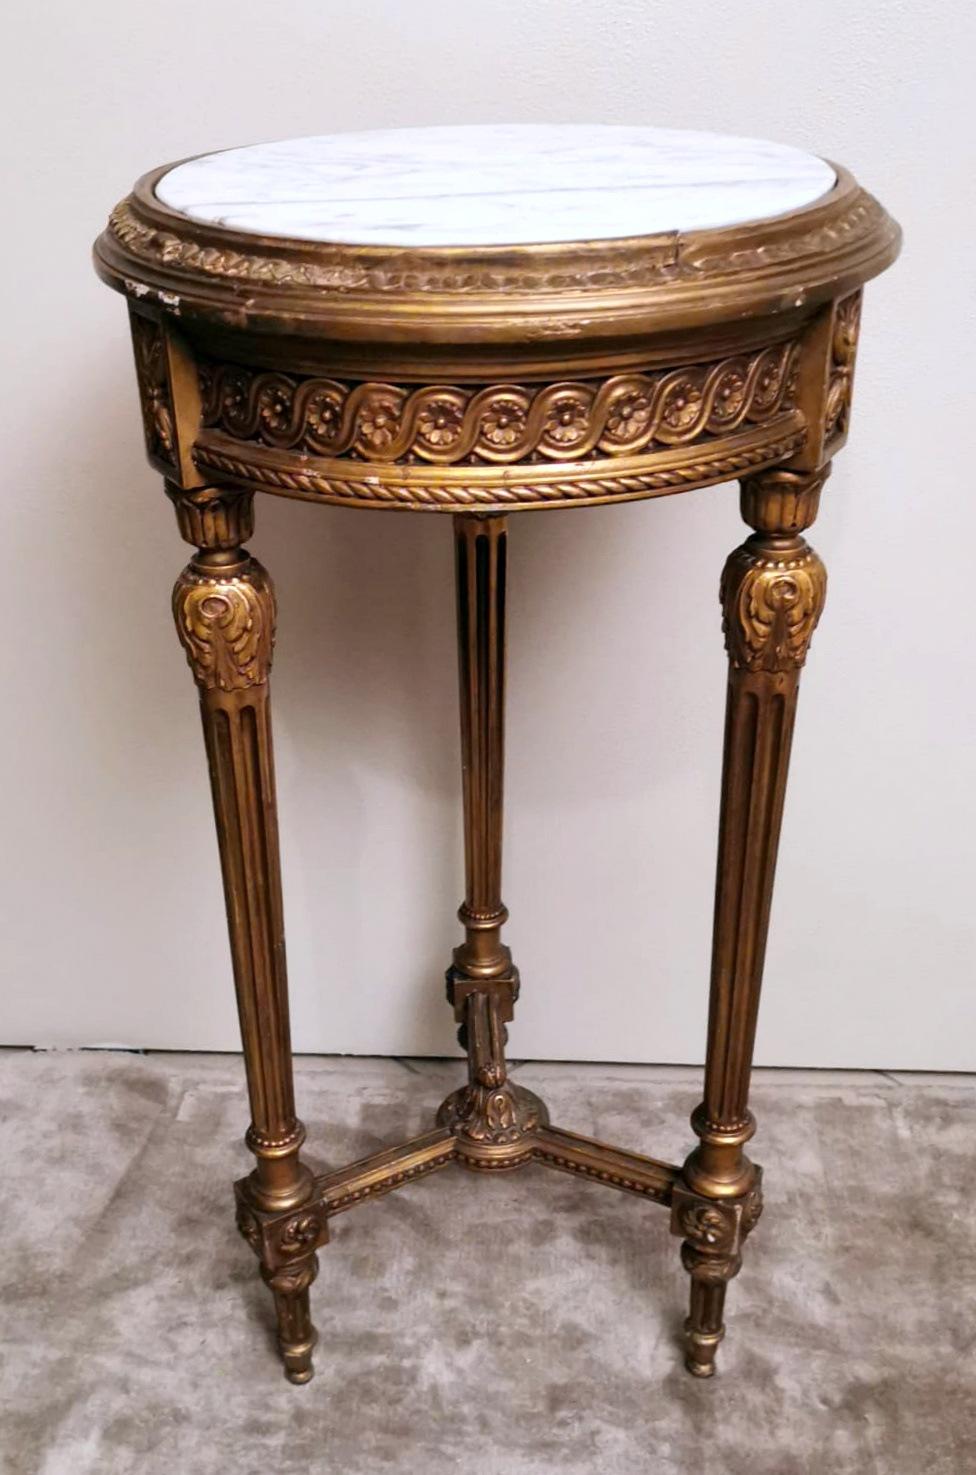 We kindly suggest you read the whole description, because with it we try to give you detailed technical and historical information to guarantee the authenticity of our objects.
Elegant and refined French guéridon in Louis XVI style in gilded wood;